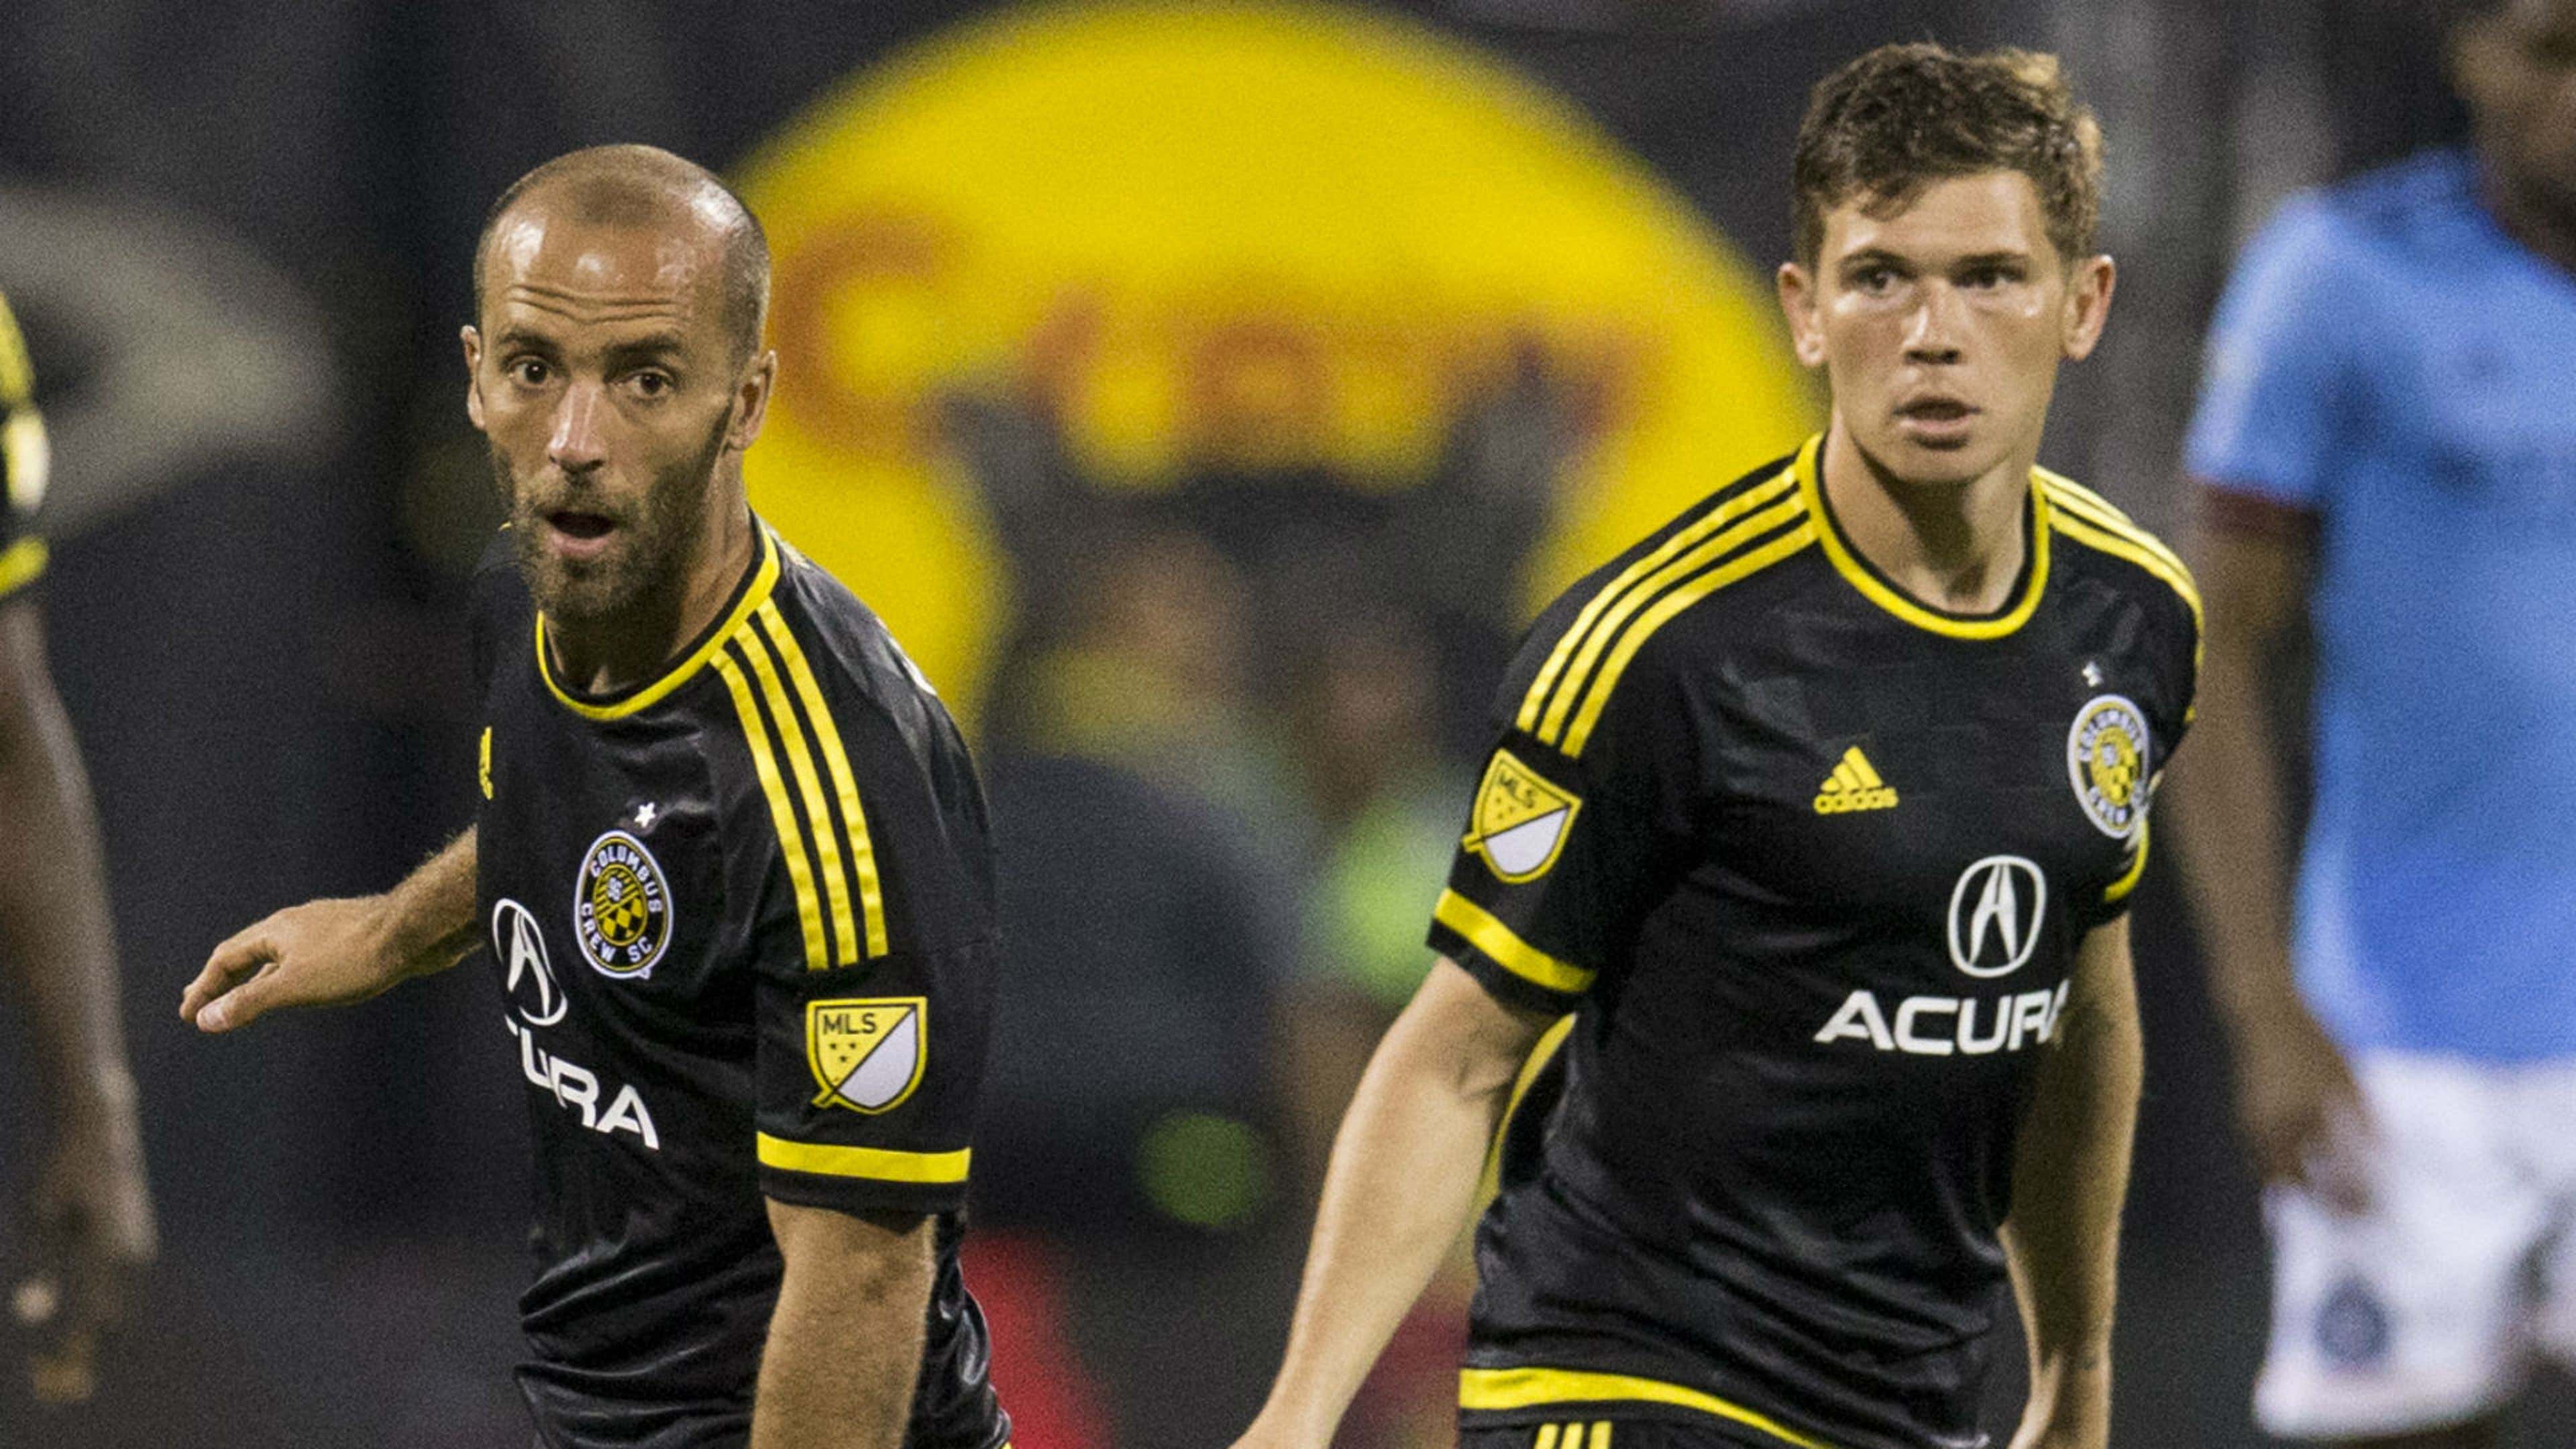 Columbus Crew 2018 season preview: Roster, projected lineup